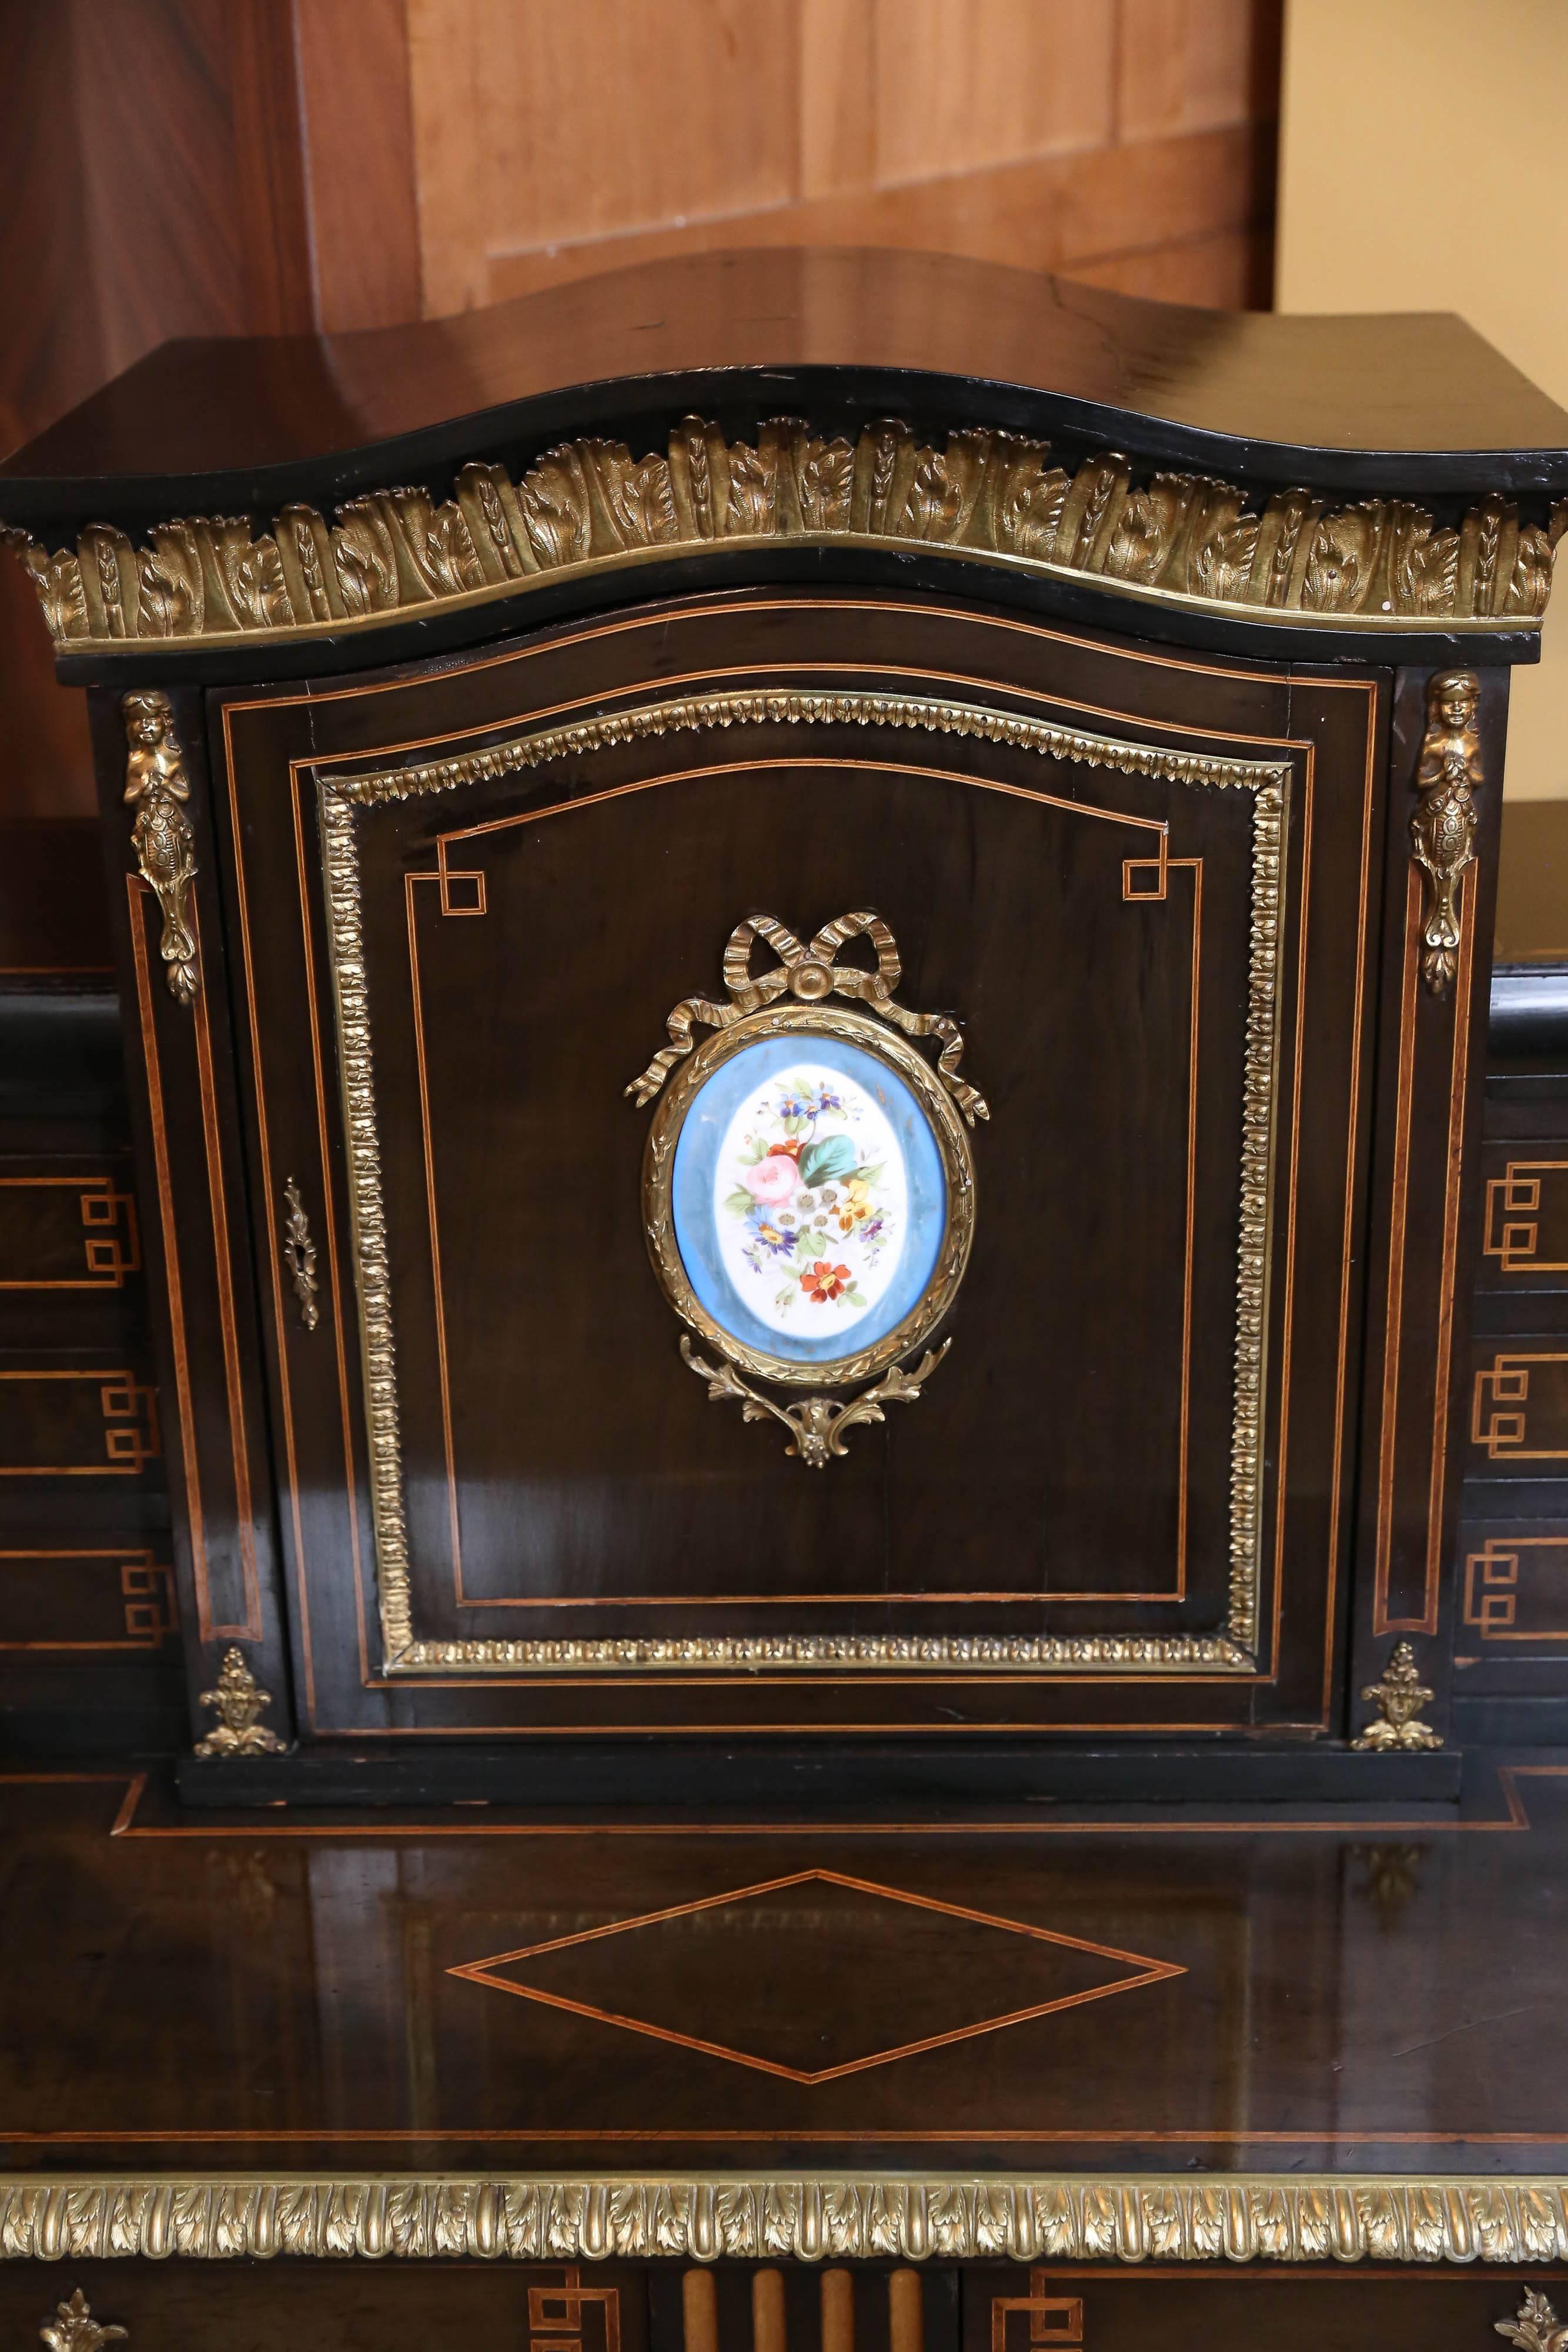 French Louis XVI style desk having floral porcelain Sèvres mounts
The upper portion of this desk has a door that opens to a rosewood interior
with one shelf bronze mounts decorate the edge of this fine piece.
Three drawers are on each side of